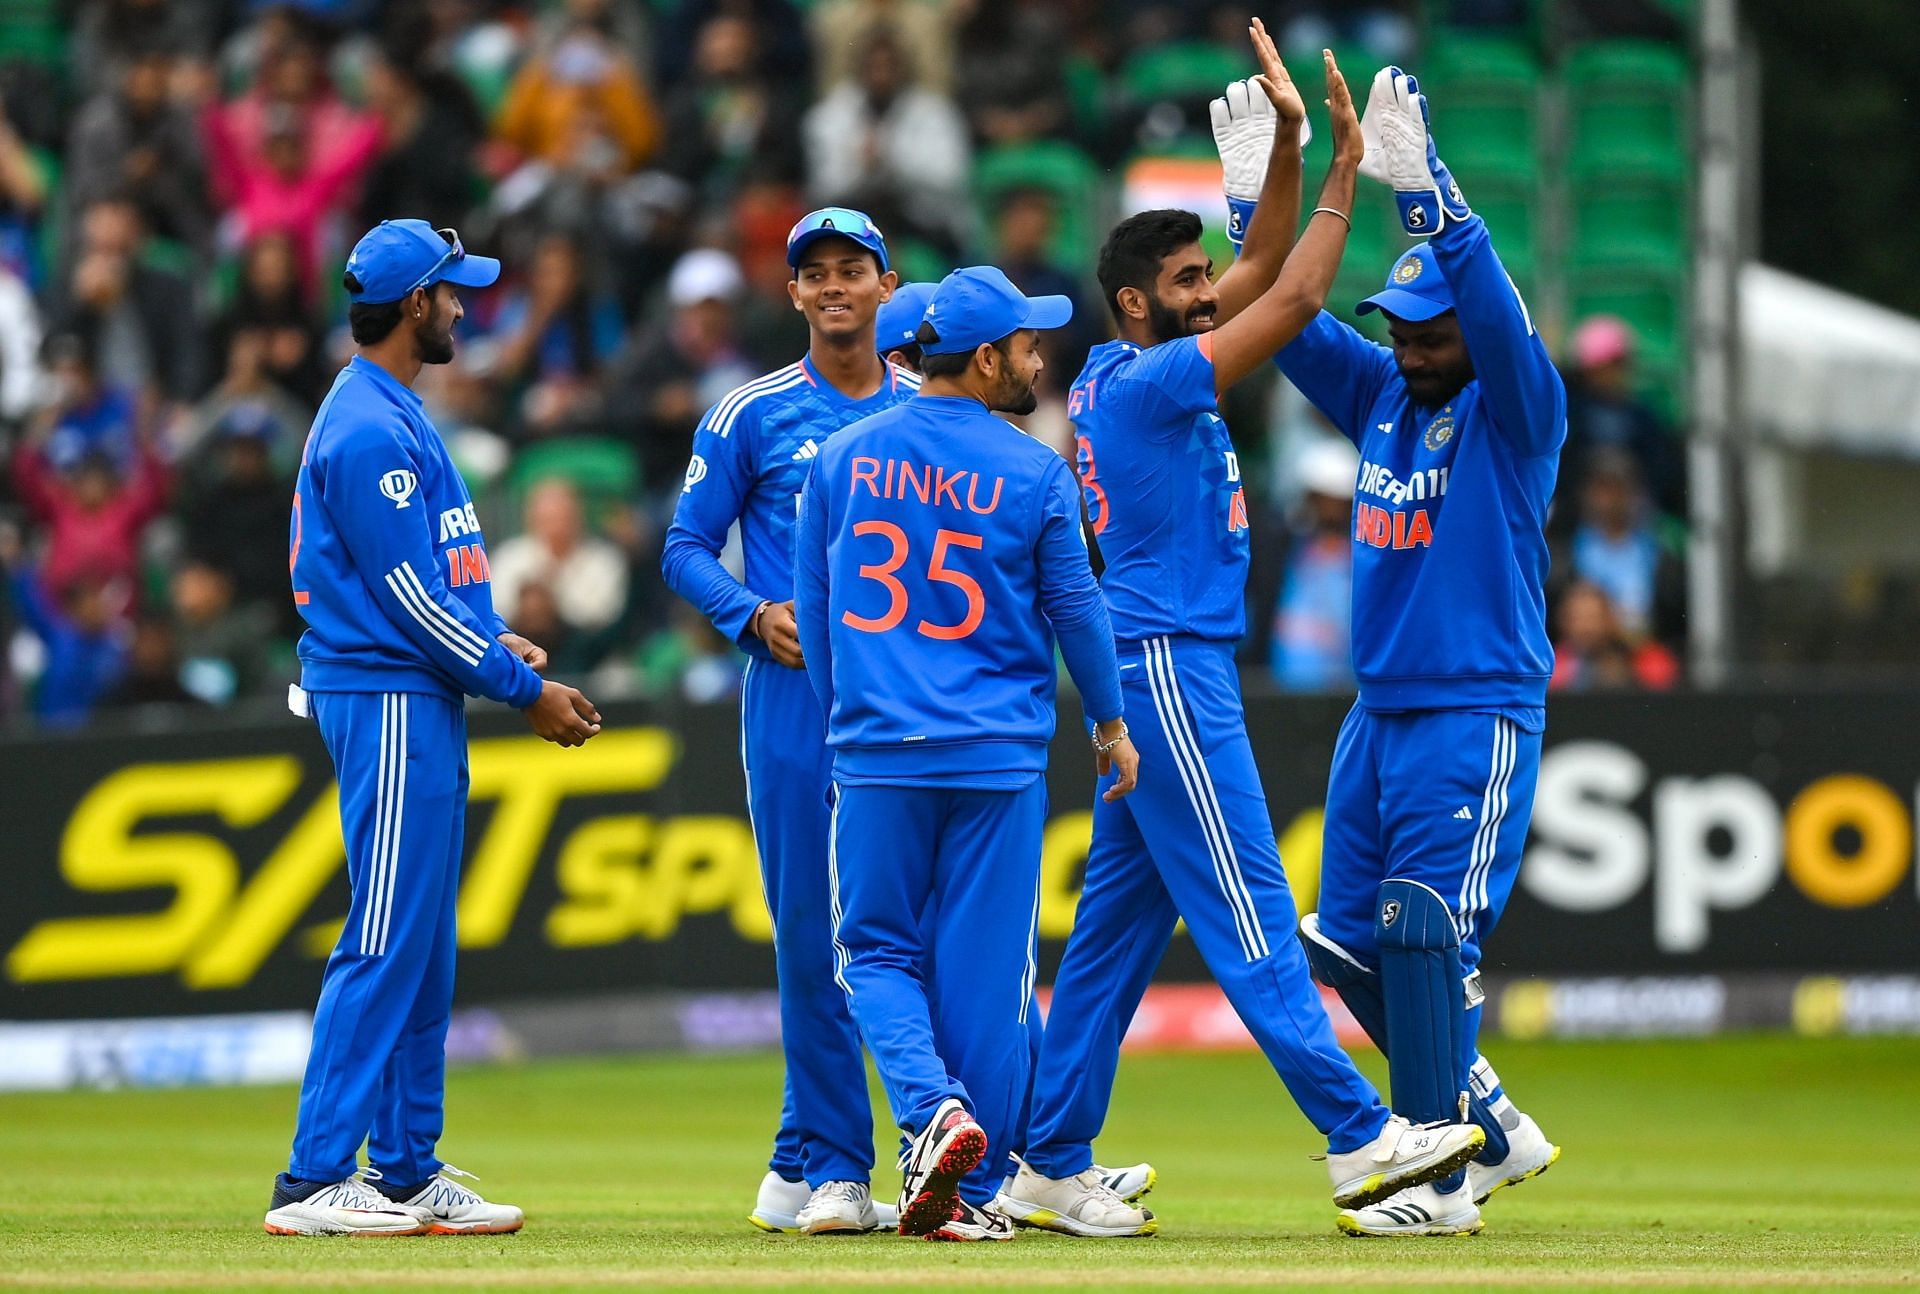 Jasprit Bumrah led Team India to a tight win on his T20I captaincy debut